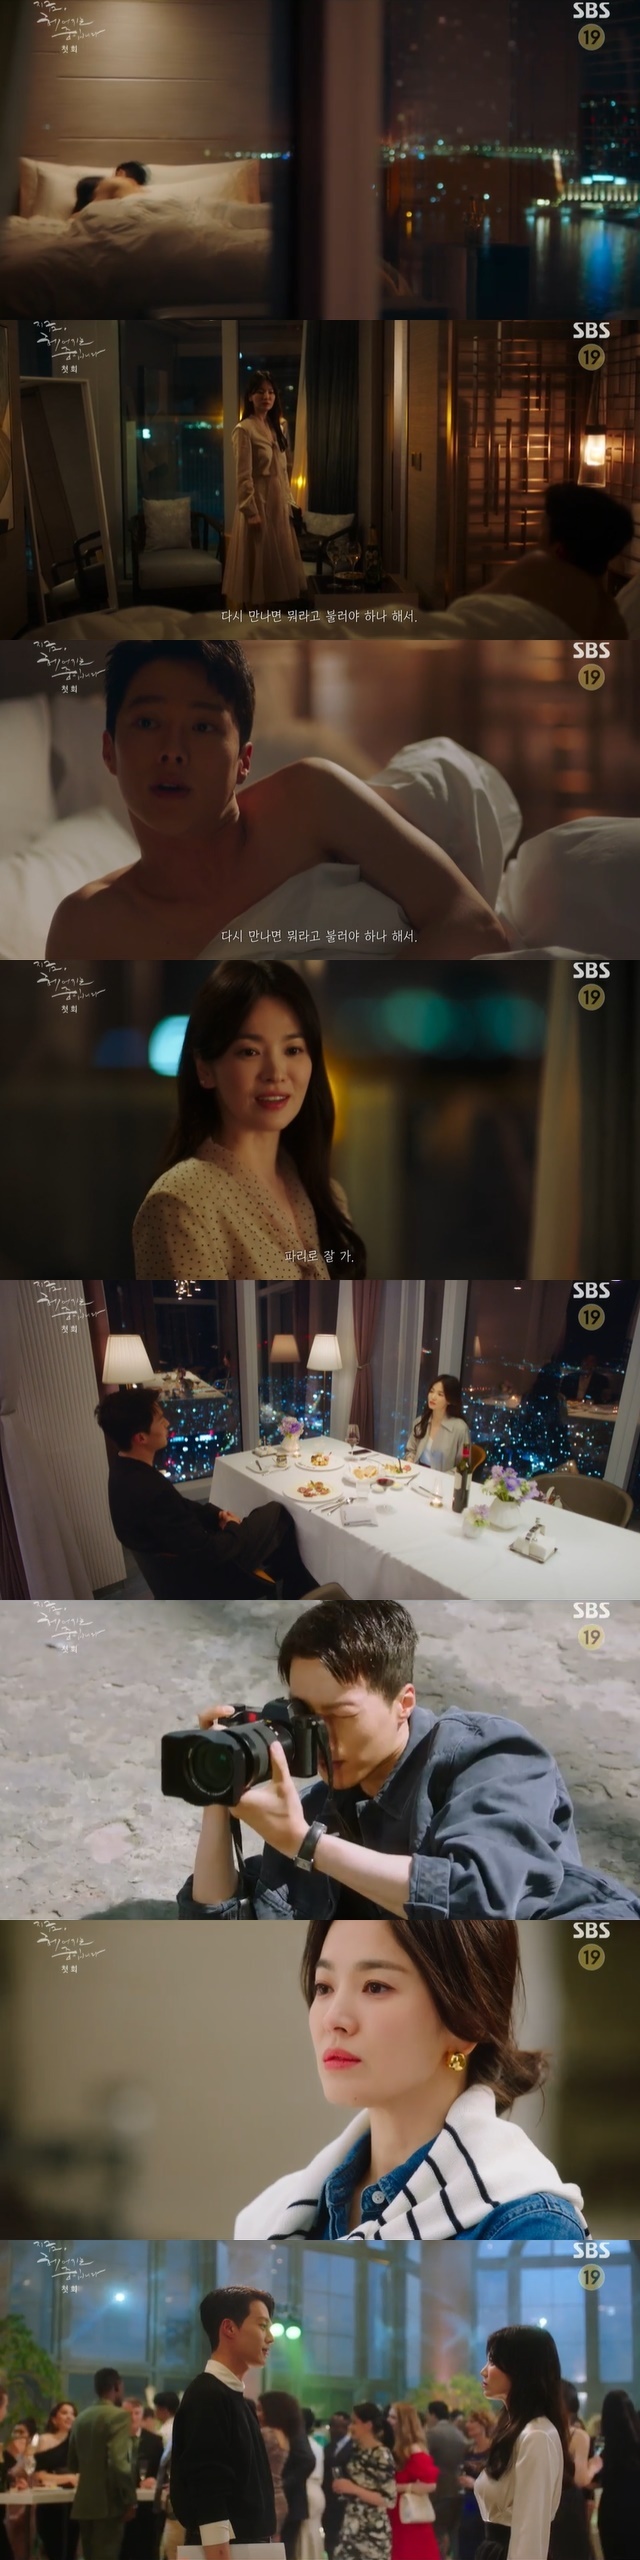 Song Hye-kyo and Jang Ki-yong started their relationship with cohabitation.In the first episode of SBSs Golden Earth Drama, Now, Im Breaking Up (playplayplay by Jane the Virgin, directed by Lee Gil-bok), which was first broadcast on November 12, two men and women who did not believe in eternity were bound to fate.On that day, Ha Young (Song Hye-kyo) participated in the first K Fashion Week opening party in Busan and played One Nightstand with a man.Two people who have intensely shared their minds in drunkenness, but Ha Young-eun promised to meet the next and said to the man who asked for his name, It will not happen.We will not be here when Fashion Week is over. Ha Young left the hotel room first without hesitation.But the relationship between them continued.Ha Young-eun was the daughter of the companys general director and representative, and the position where he went out on behalf of Hwang Chi-sook (Choi Hee-seo), a high school alumni, whose opponent was Yoon Jae-guk, the one of Baro yesterdays Nightstand opponents.Ha Young-eun did not notice that Yoon Jae-wook was the man, but pretended to be a hunch, only eating and digging first.In the meantime, Ha Young had to ask Yoon Jae-guk for work first.Pecker needs a picture book tomorrow for his contract with Olivier, which he must win. Pecker is in a difficult crisis to find, and Yoon Jae-guk, who introduced his job as a freelance Pecker, came to mind.Ha Young-eun hurriedly followed Yoon Jae-guk, who had been separated, and left the work.Yoon accepted Ha Youngs proposal, though he was not happy about it, and the next morning he made the filming of Baro more professional than he thought.Ha Young-eun watched Yoon Jae-kook concentrate on his work and noticed that he was his one-stand opponent late, but he continued to pretend not to know.Since then, Ha Young has brought the work to Olivier, who has already signed a contract with another company.However, the opponent has already completed the contract with the company that has already offered three times the down payment, and he can not reverse it.Ha Young, who has been insulted and has not said anything, has been re-emerged by Yoon Jae-guk in front of him.Yoon Jae-guk, who has already overheard all the conversations outside, dramatically revealed his identity.Yoon Jae-guk was a famous Pecker who put in love calls several times to make Olivier a full-time Pecker, not an amateur Pecker.Yoon Jae-guk sided with Ha Young-eun and rescued her from a difficult situation.After that, Yoon Jae-guk had a drink with Ha Young-eun and said, You said that you wanted to make a statement. He also asked why he did not know.